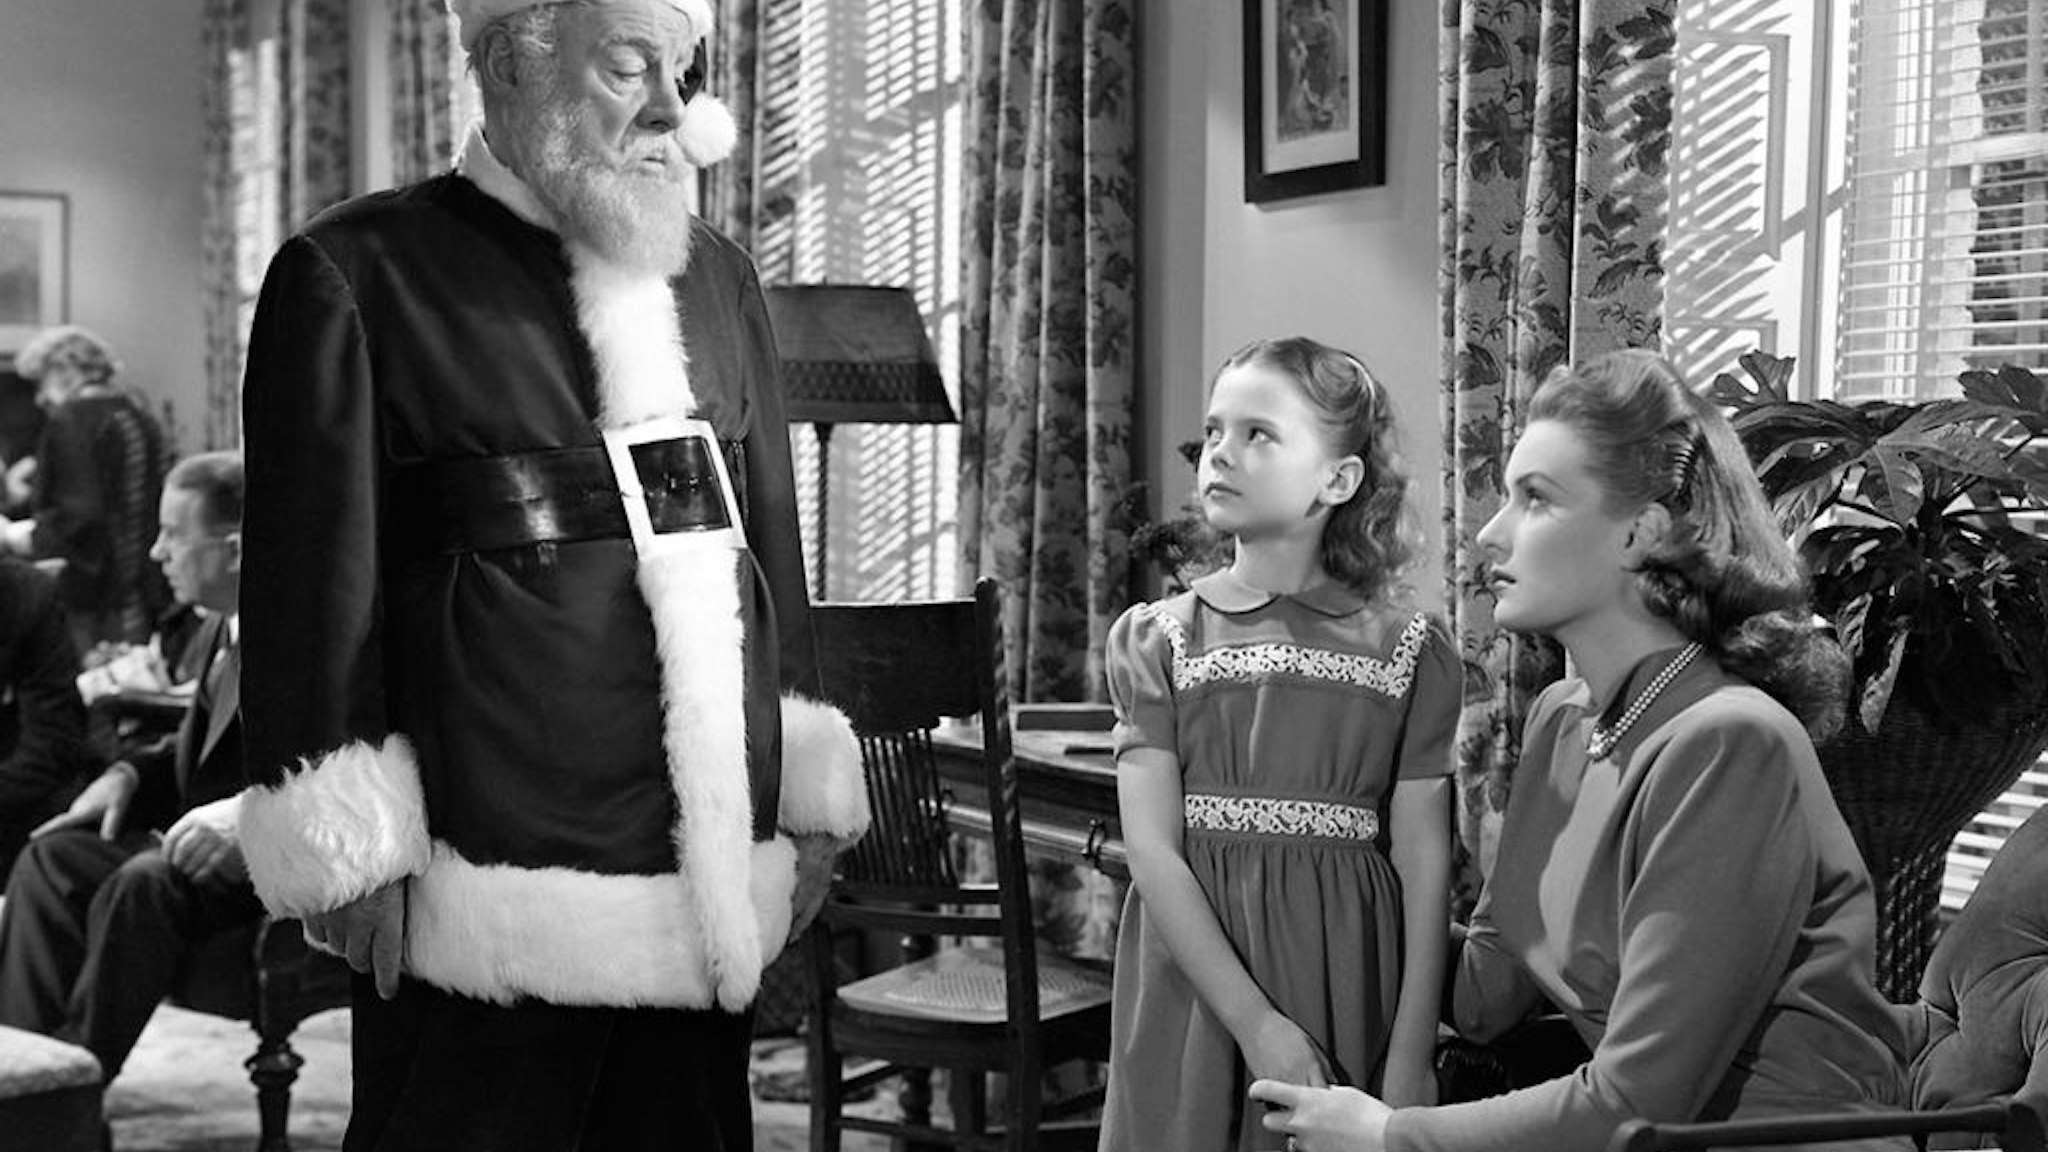 Left to right: Edmund Gwenn (1877 - 1959) as Kris Kringle, Natalie Wood (1938 - 1981) as Susan Walker and Maureen O'Hara as Doris Walker in 'Miracle On 34th Street', written and directed by George Seaton, 1947. (Photo by Silver Screen Collection/Getty Images)